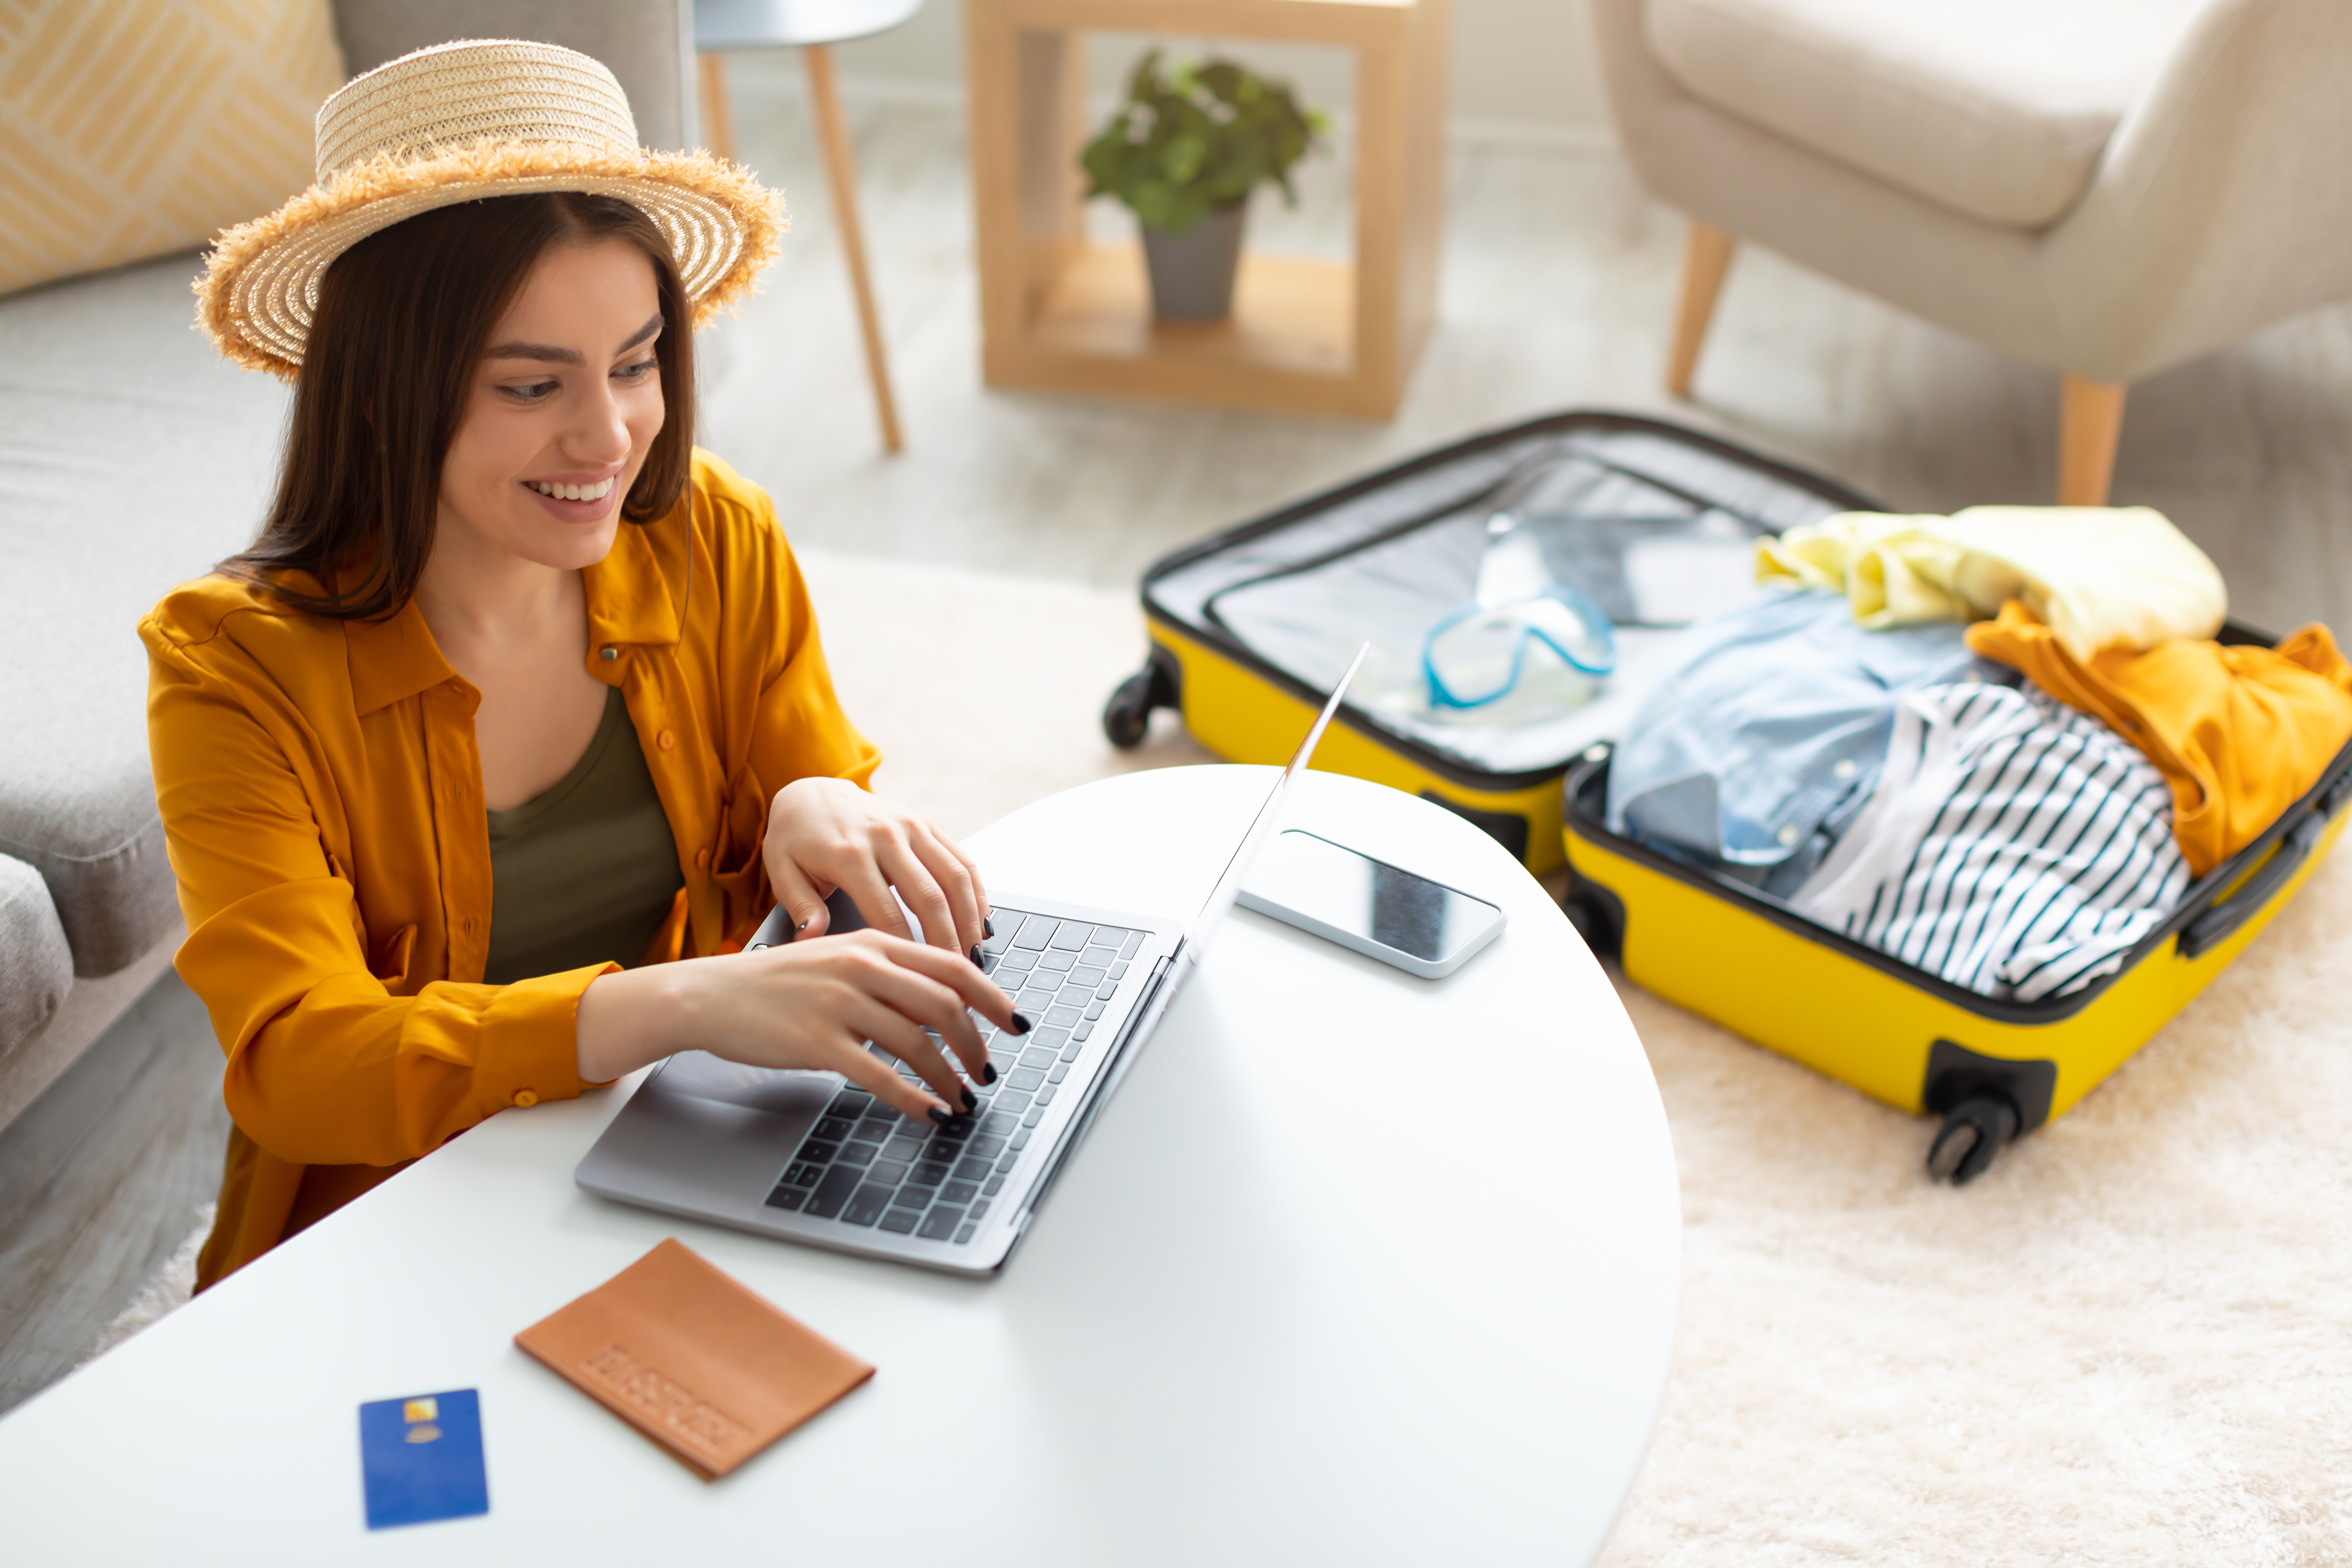 Woman wearing a hat booking a vacation on her computer next to an open suitcase full of clothes